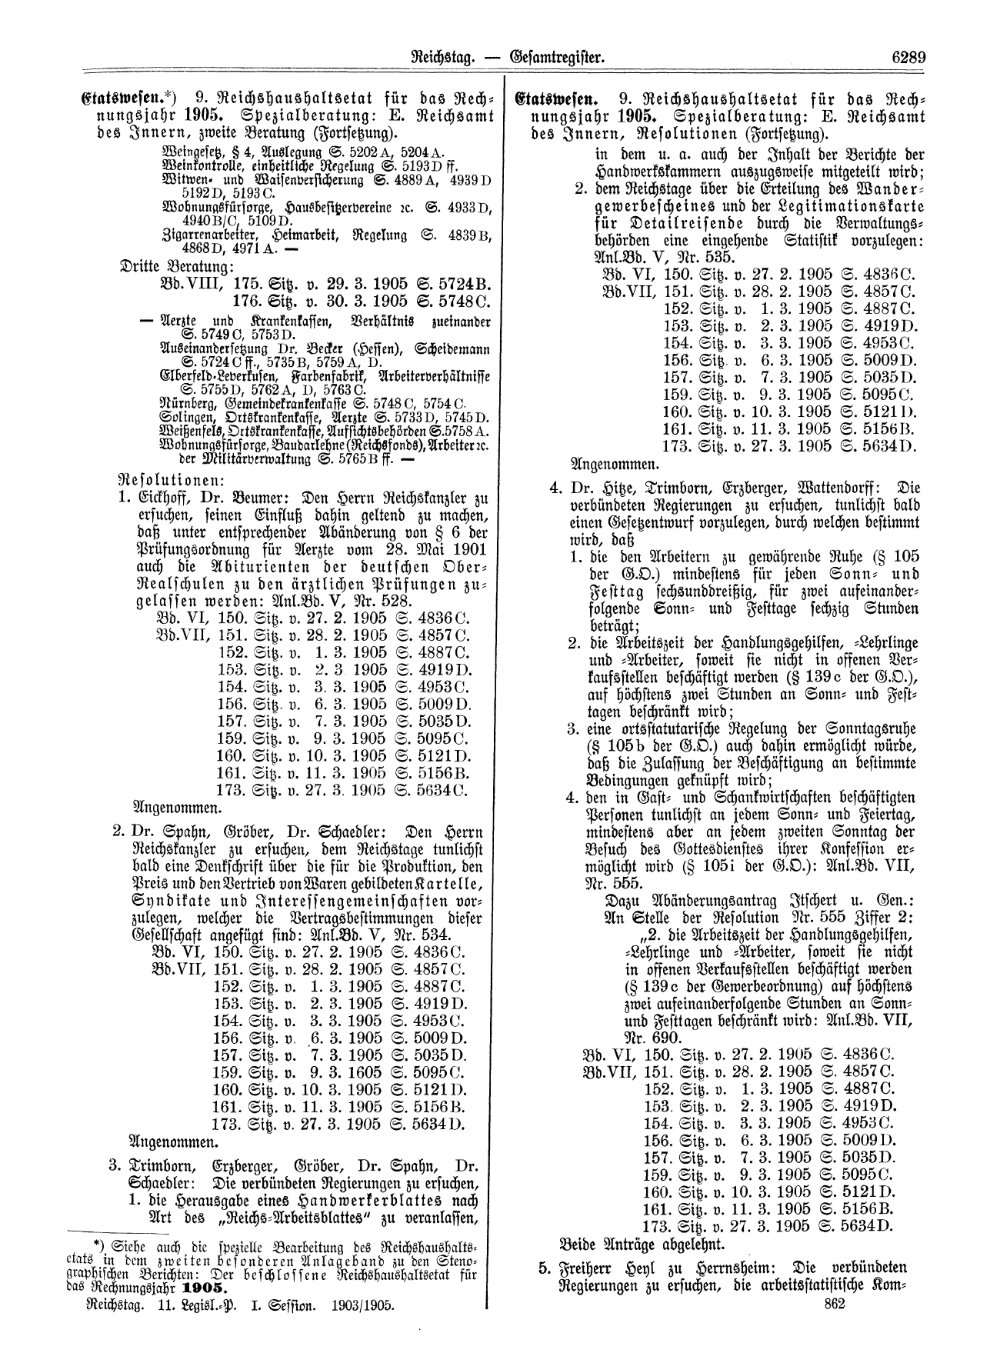 Scan of page 6289